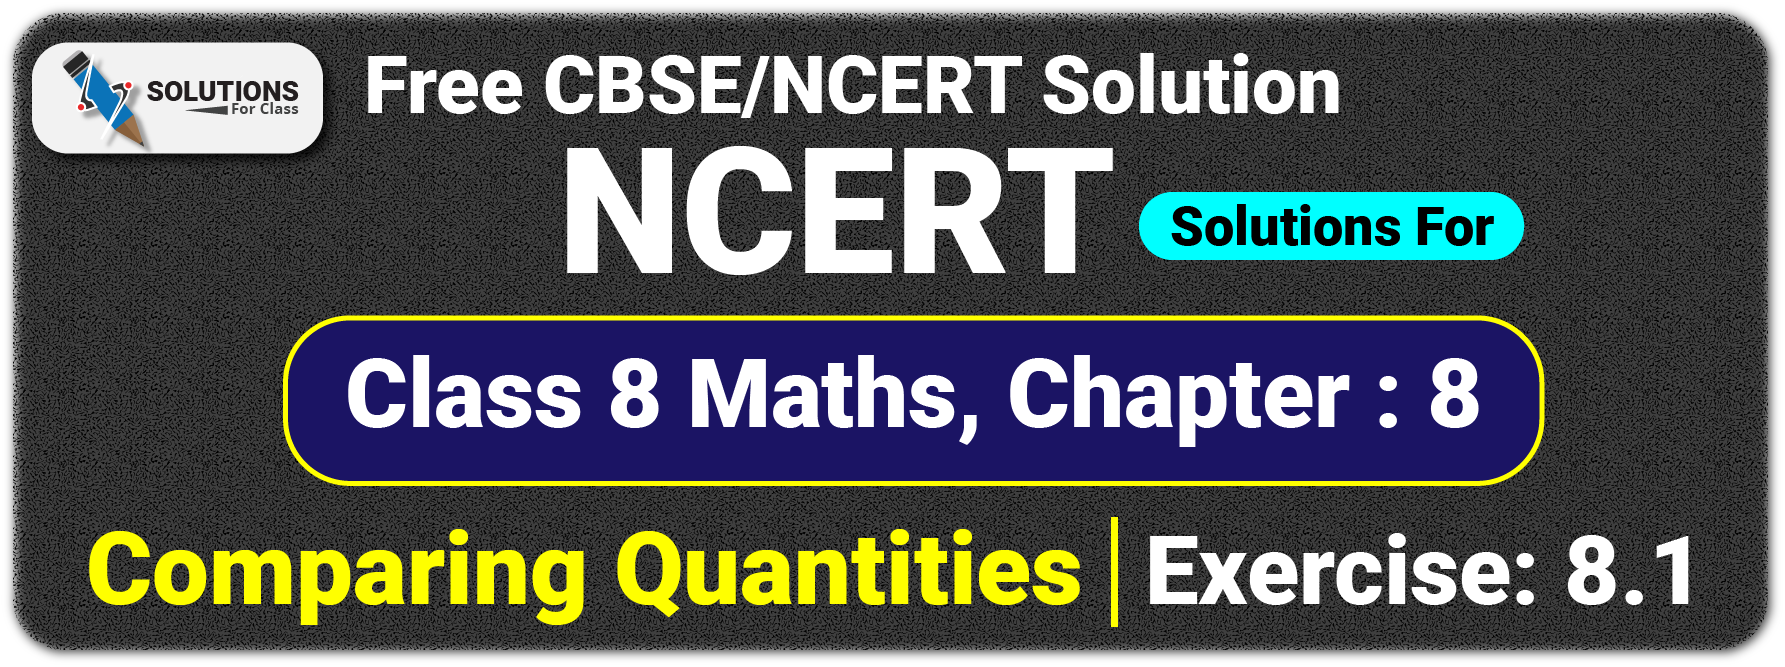 NCERT Solutions For Class 8 Chapter 8, Comparing Quantities, Exercise 8.1